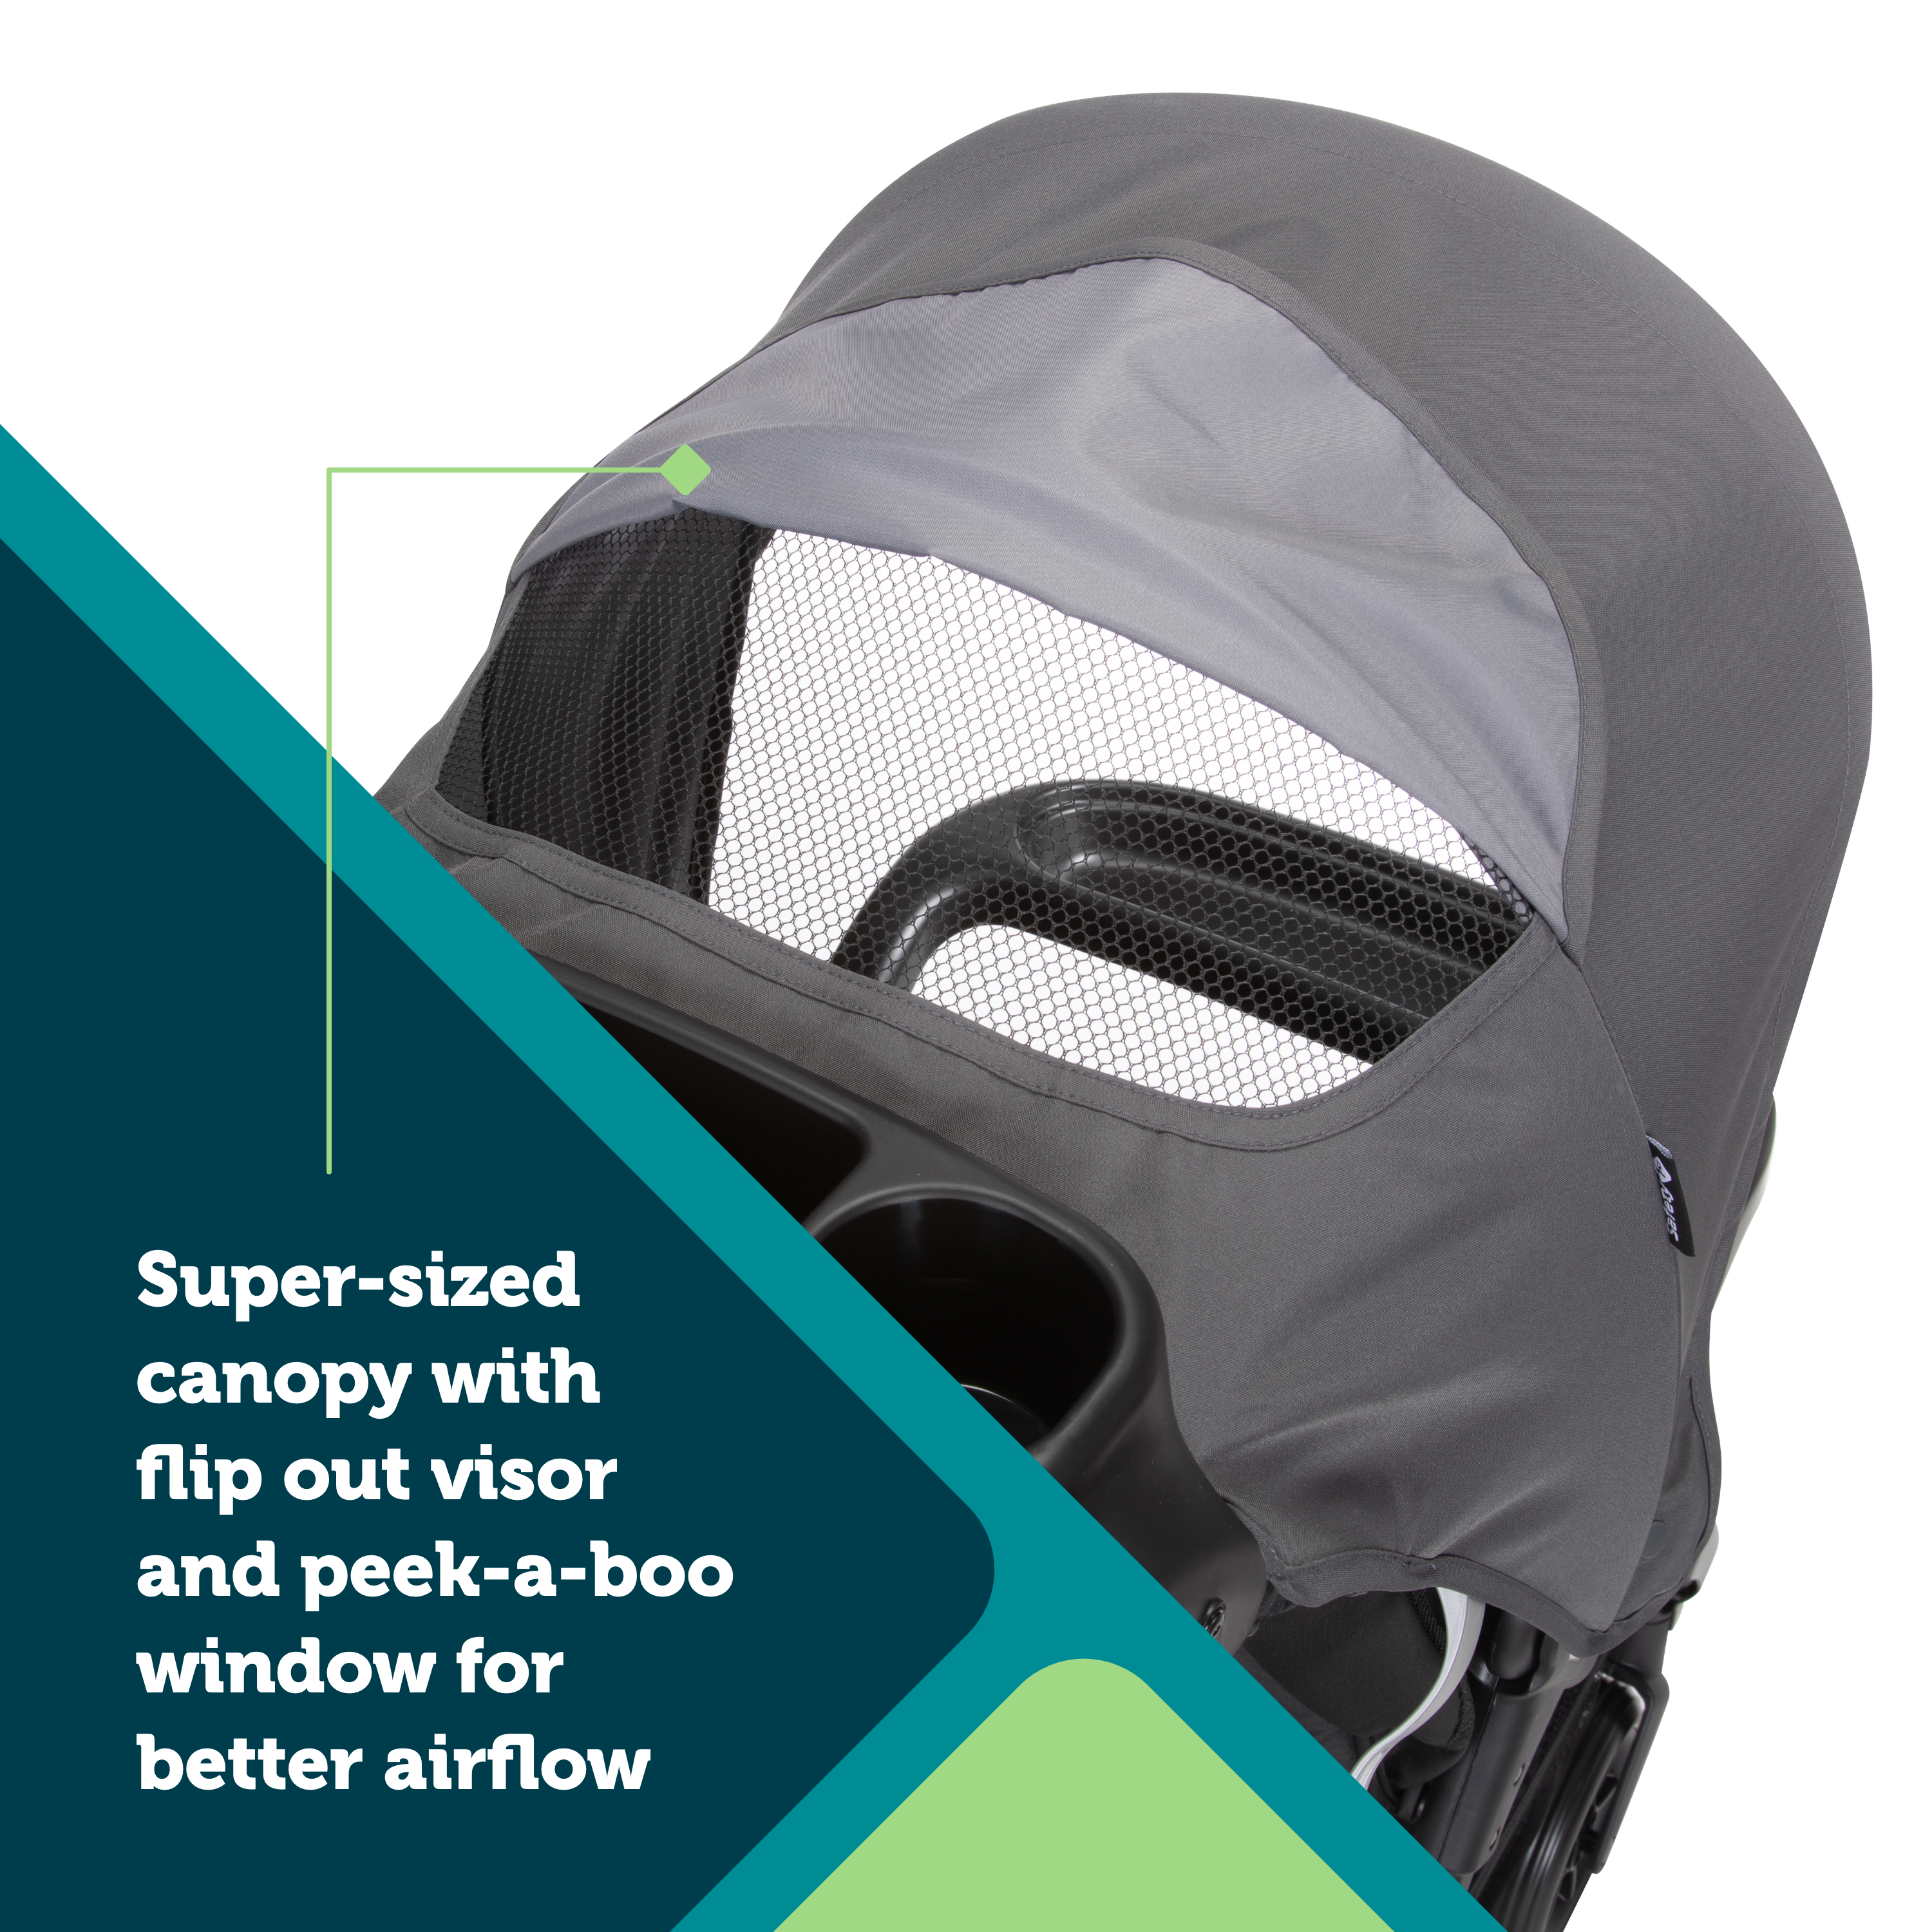 Smooth Ride Travel System - super-sized canopy with flip out visor and peek-a-boo window for better airflow